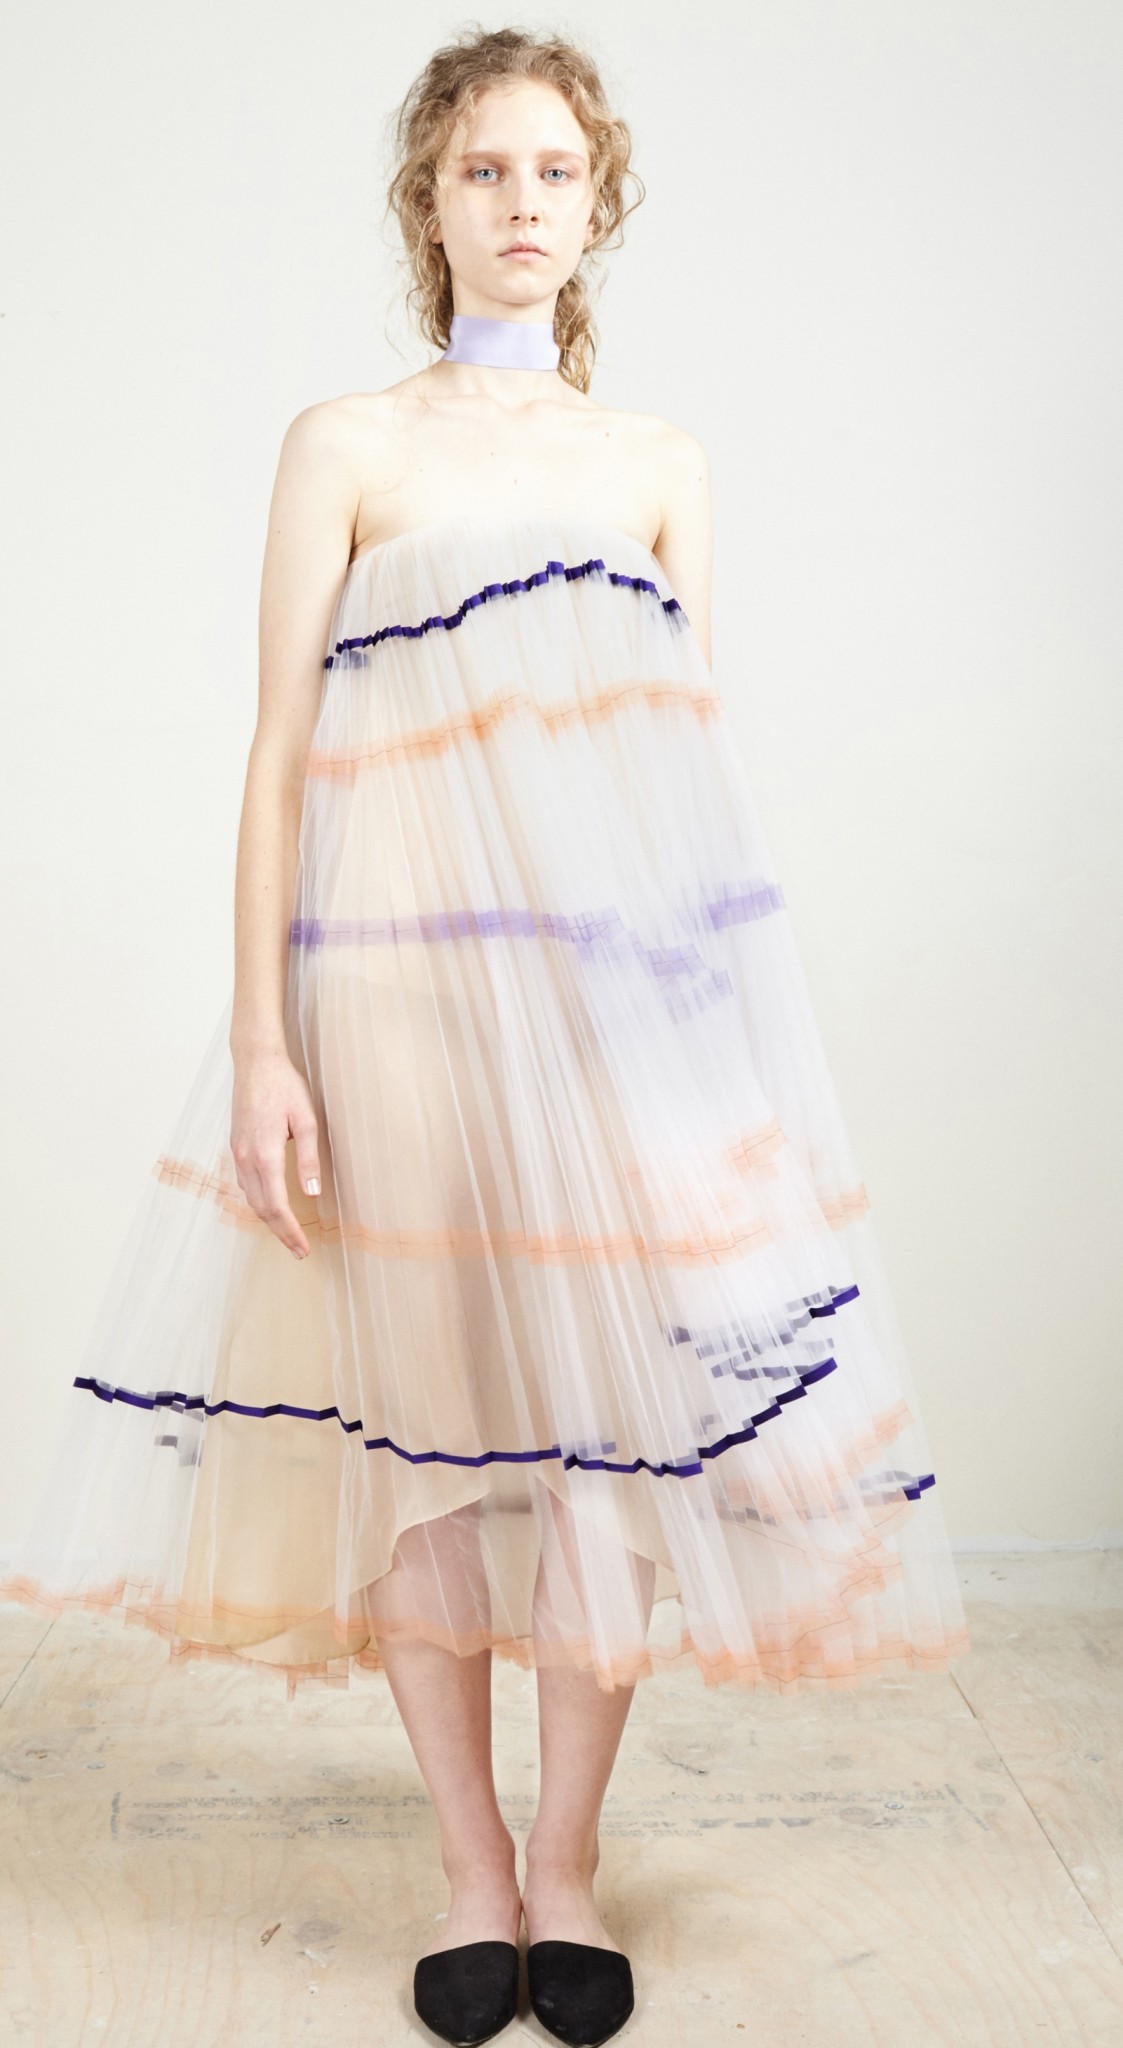 Noa Raviv’s Off-Line collection starts at $1,800. Photo by Ryan Duffin